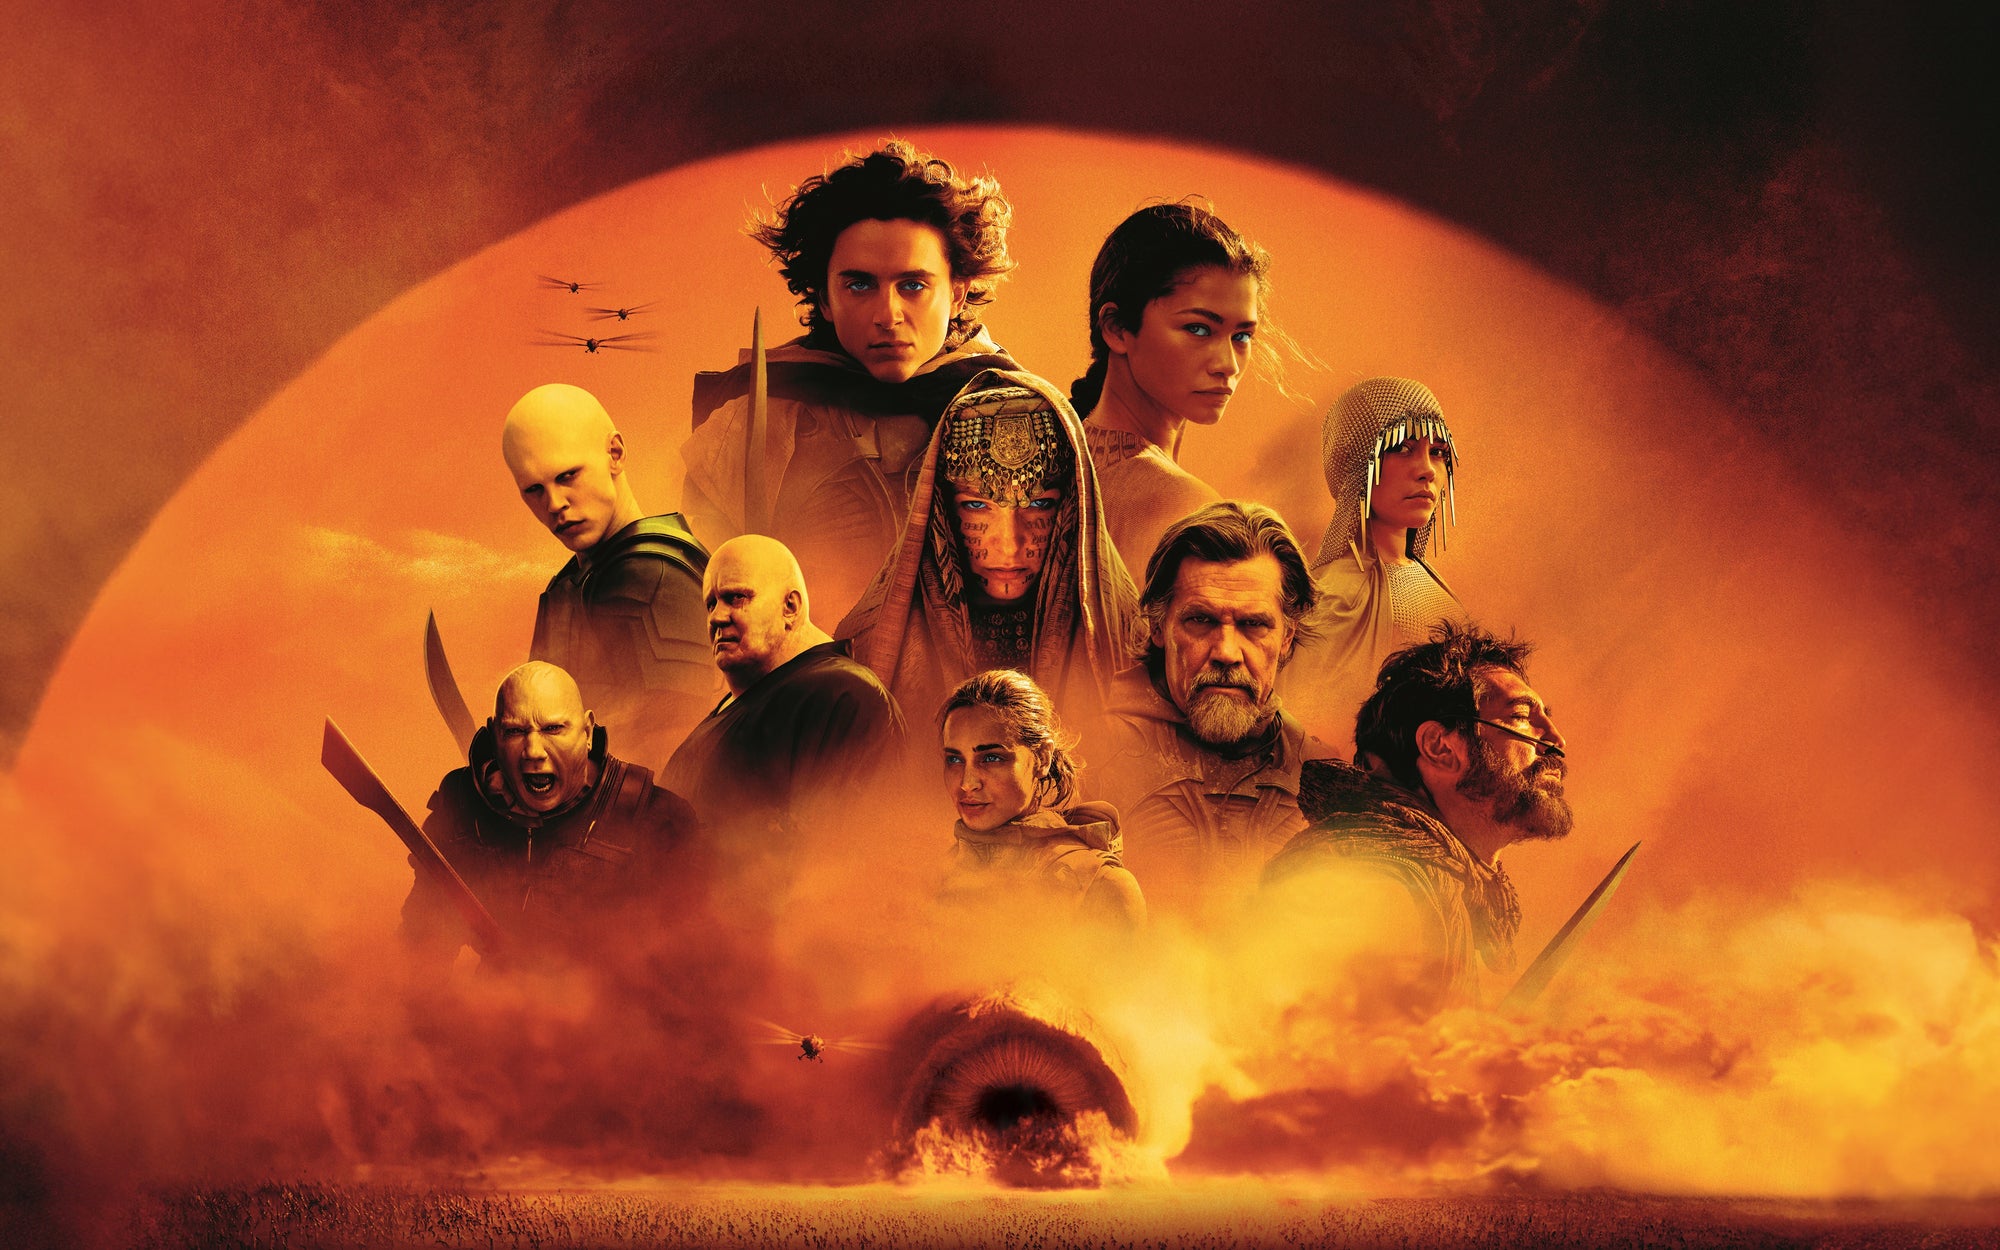 Dune Part 2 Review. A long awaited cinematic masterpiece.